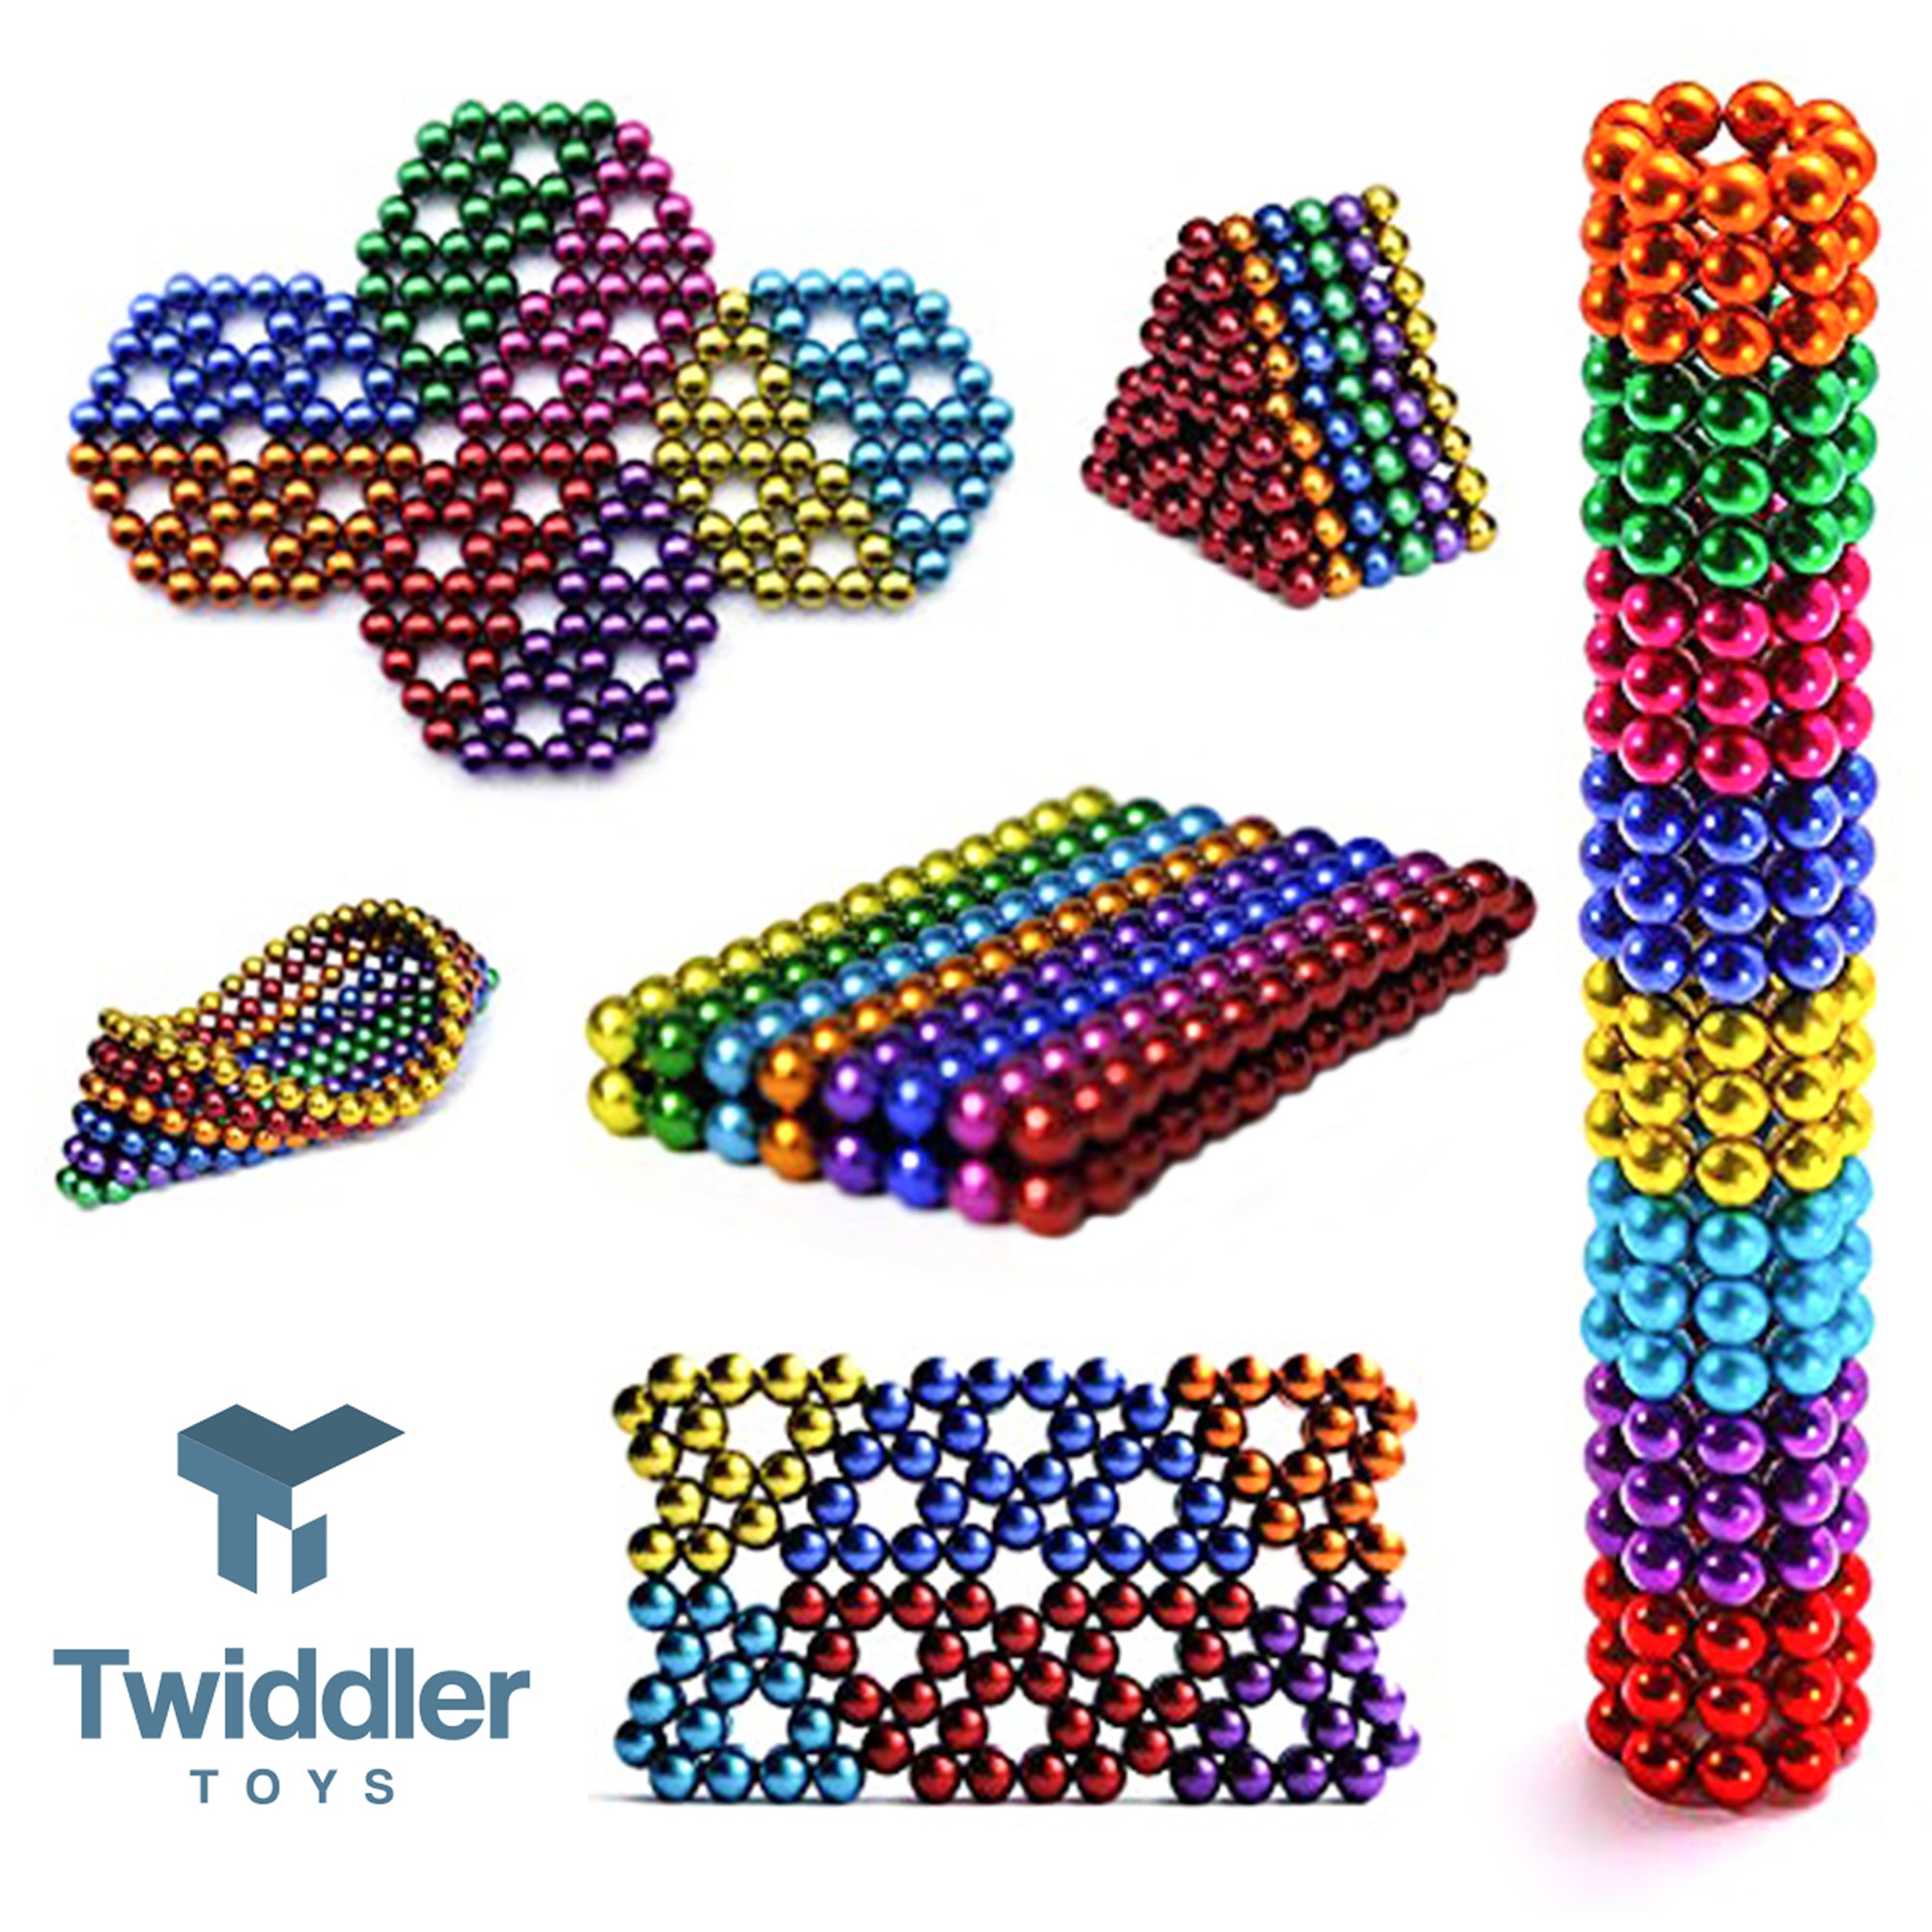 Toys, Magnetic Toy Rainbow Magnet Balls 216pcs 5mm Multi 8 Colored  Buckyballs Case